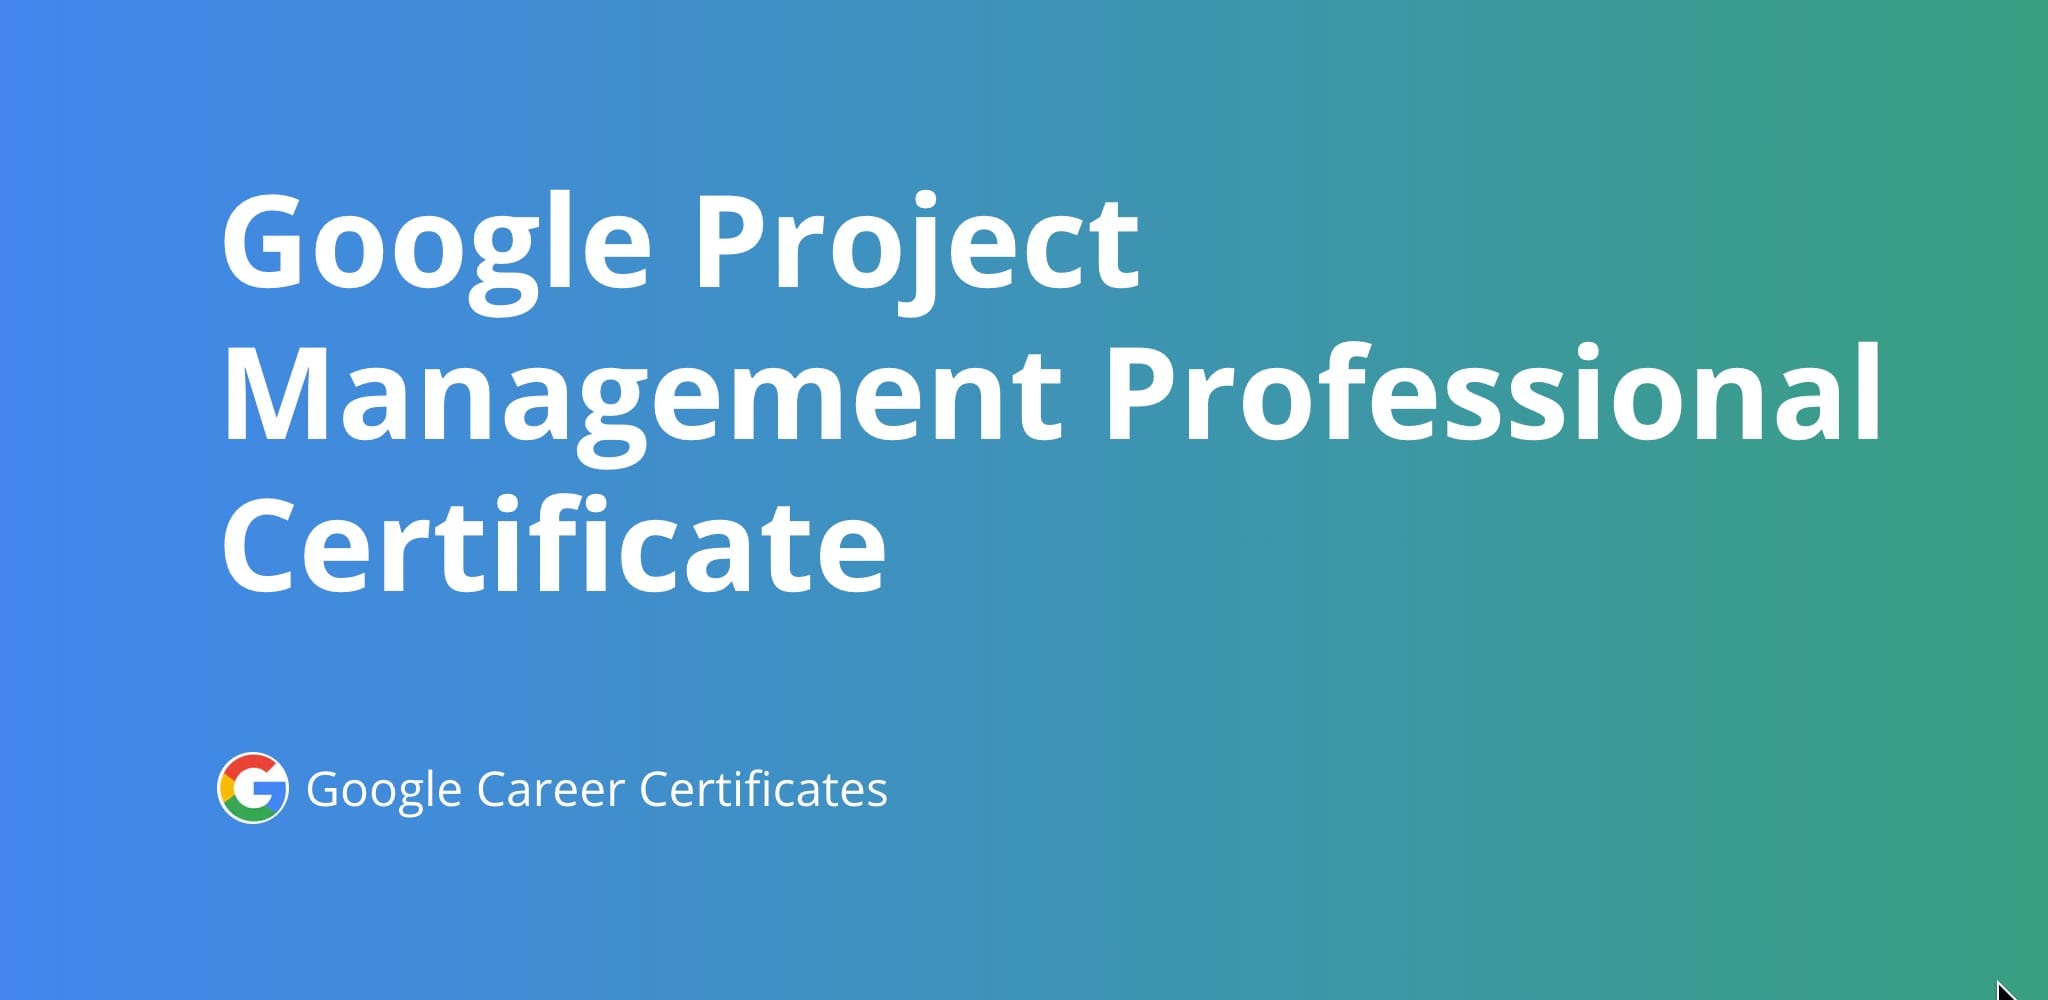 Google Project Management Professional Certificate